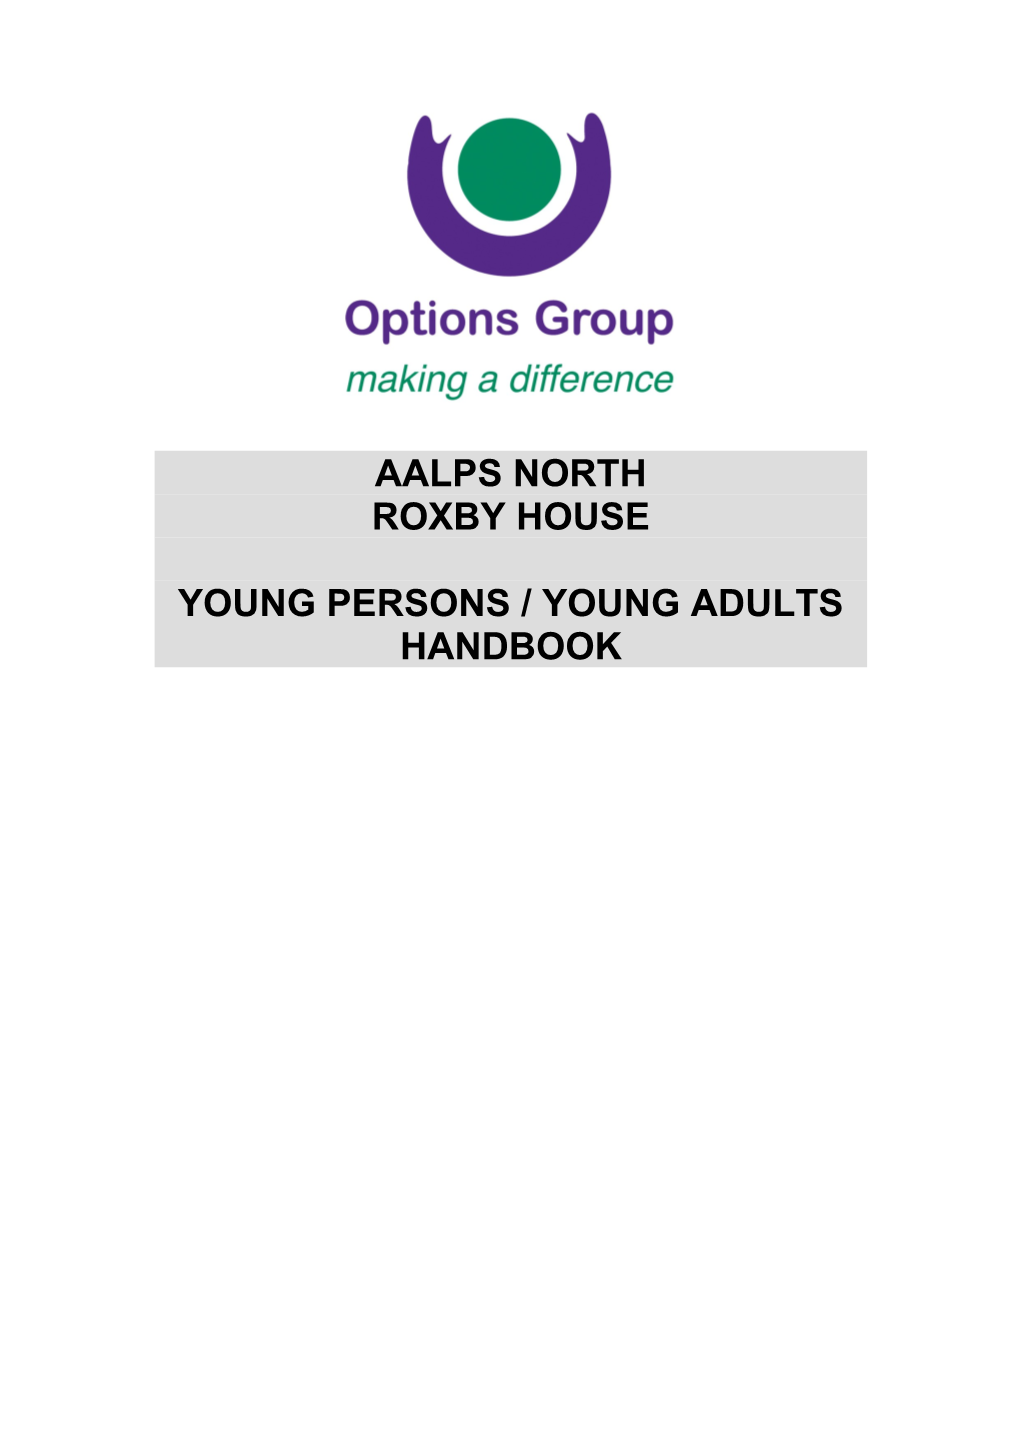 Young Persons / Young Adults Handbook